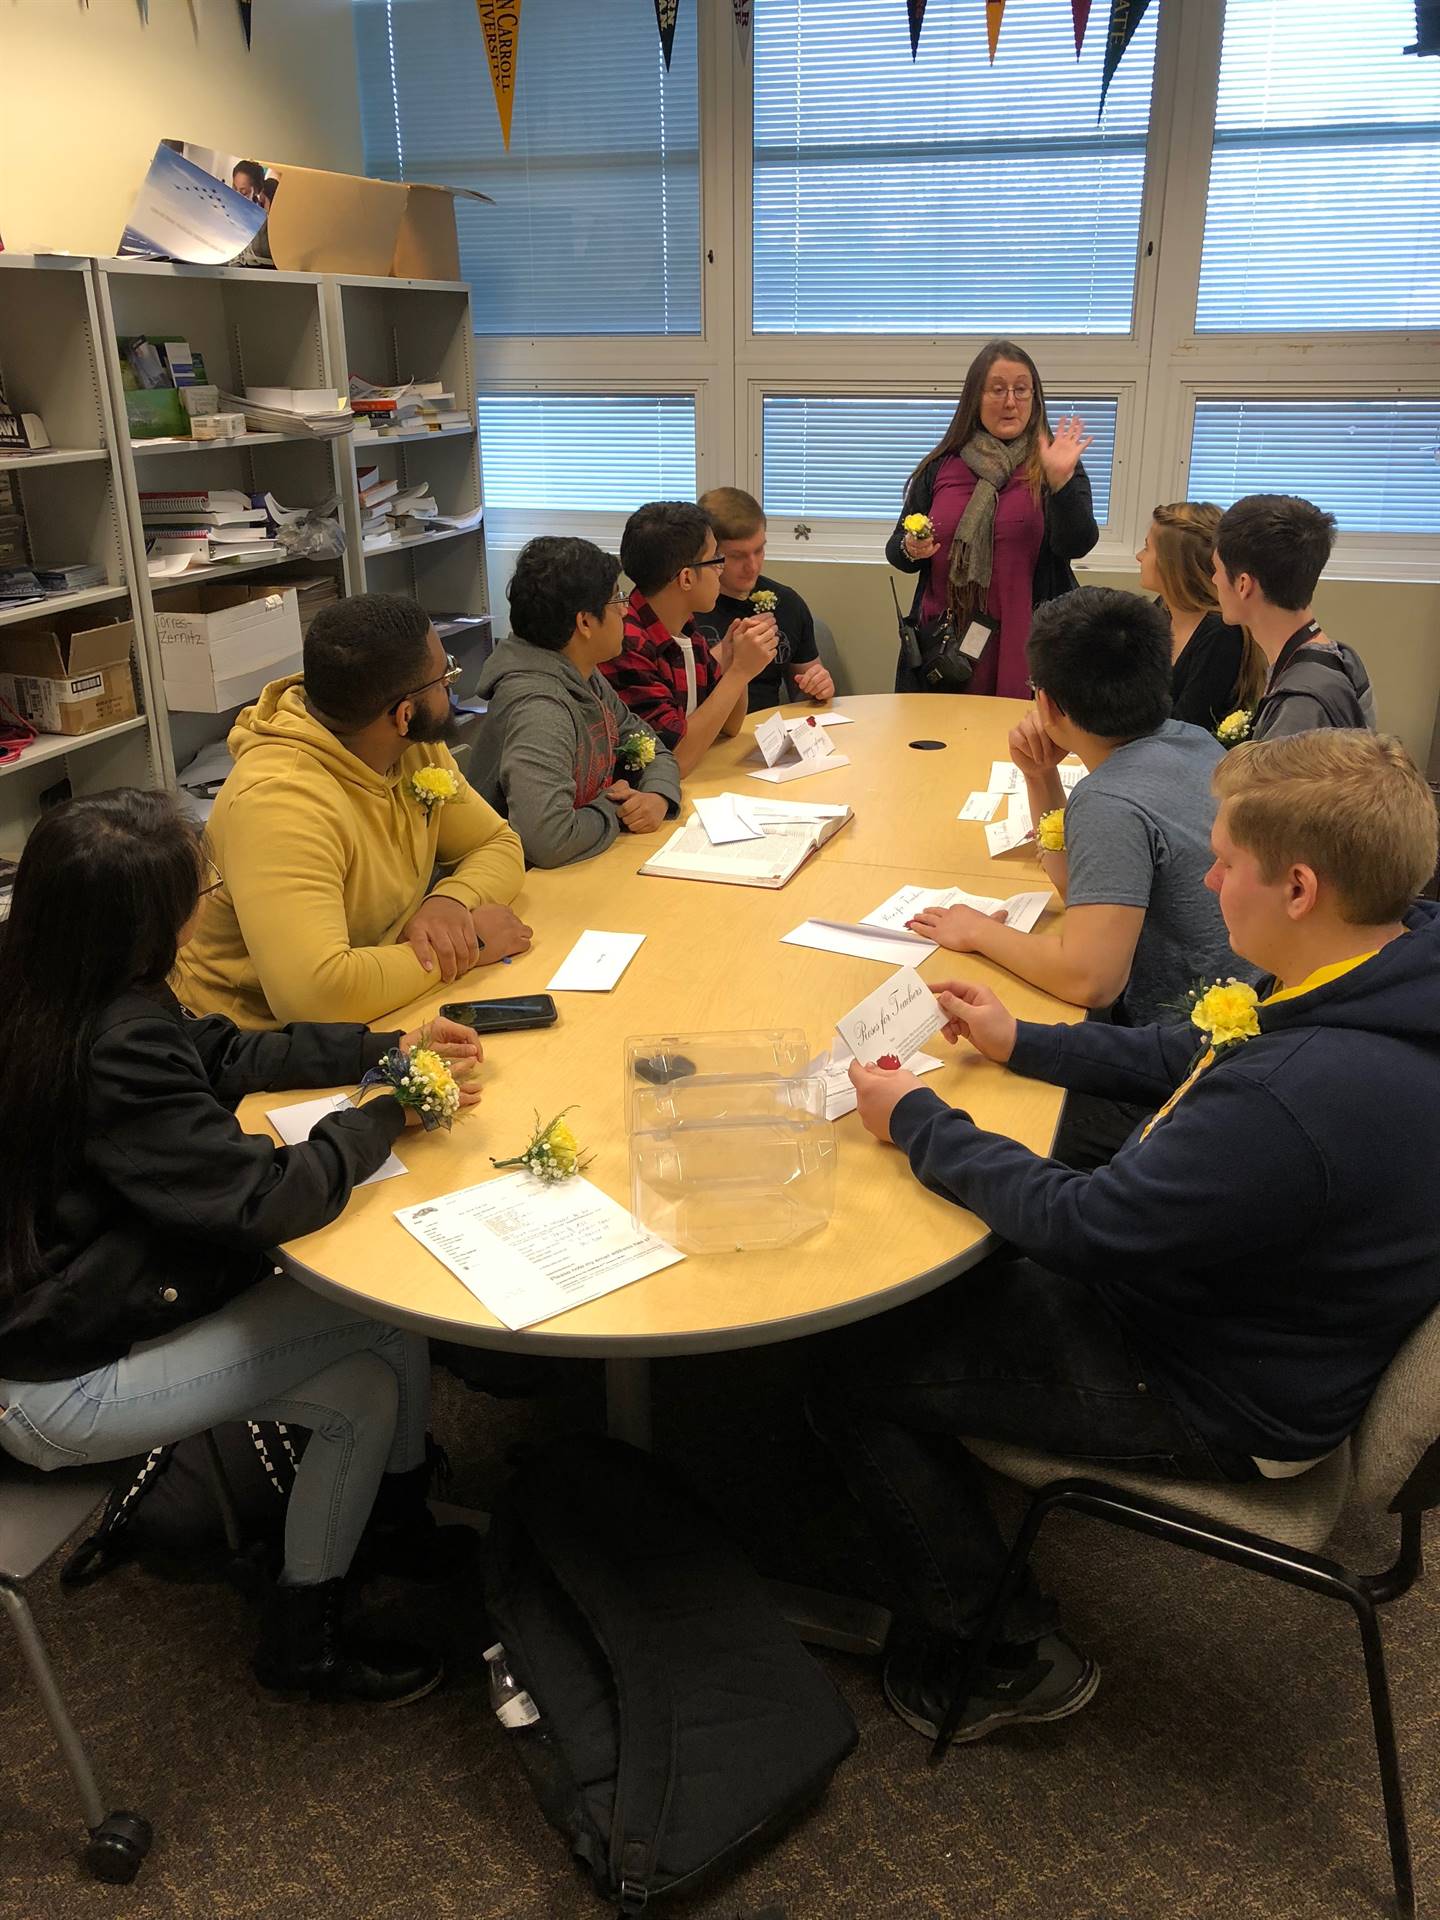 Top 10 students meeting with principal